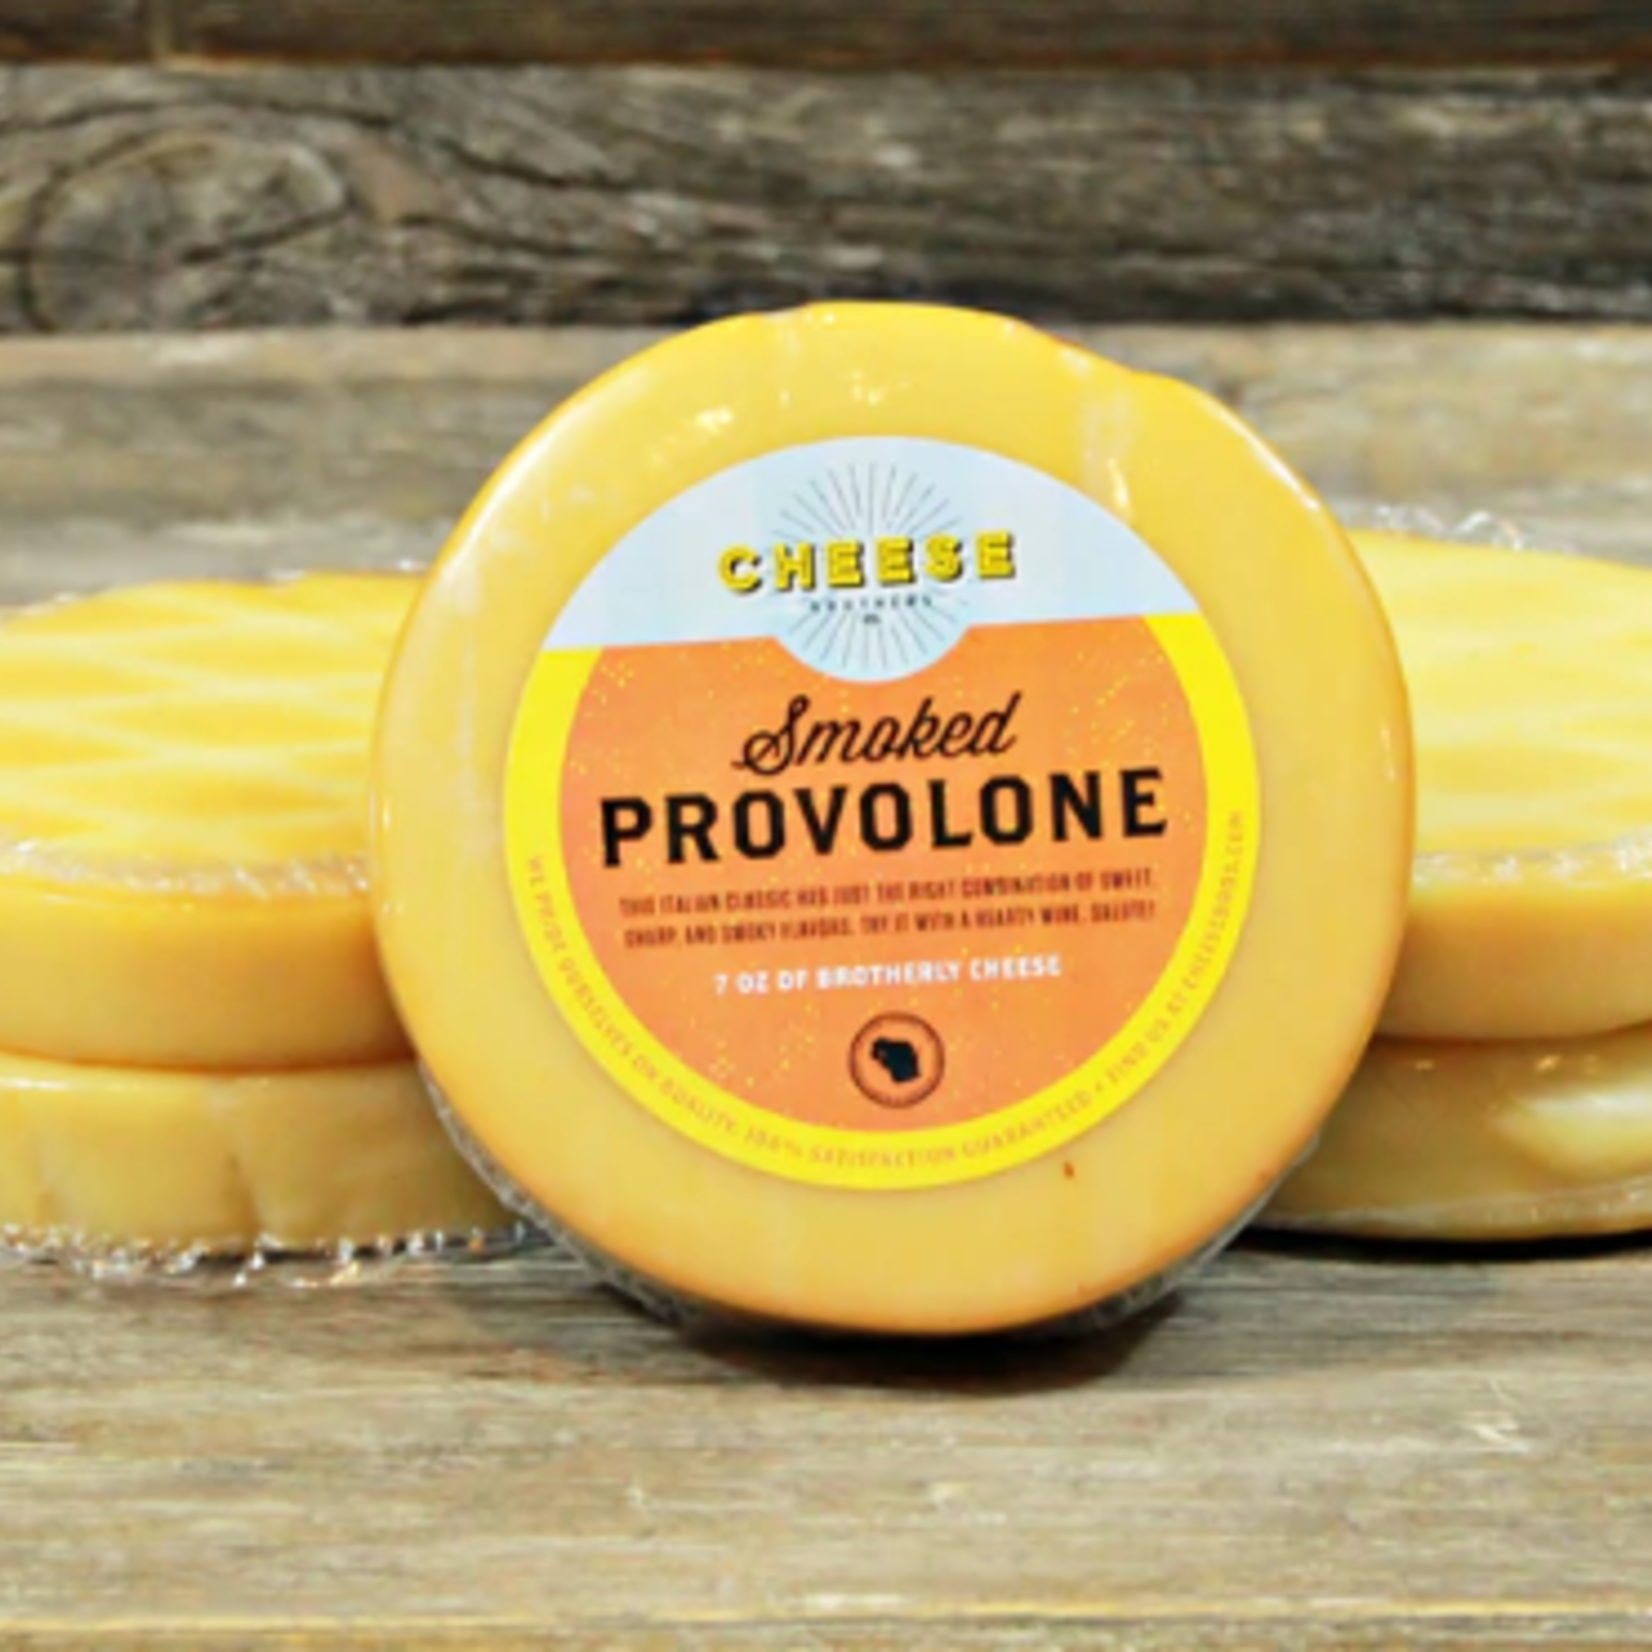 Cheese Brothers Smoked Provolone